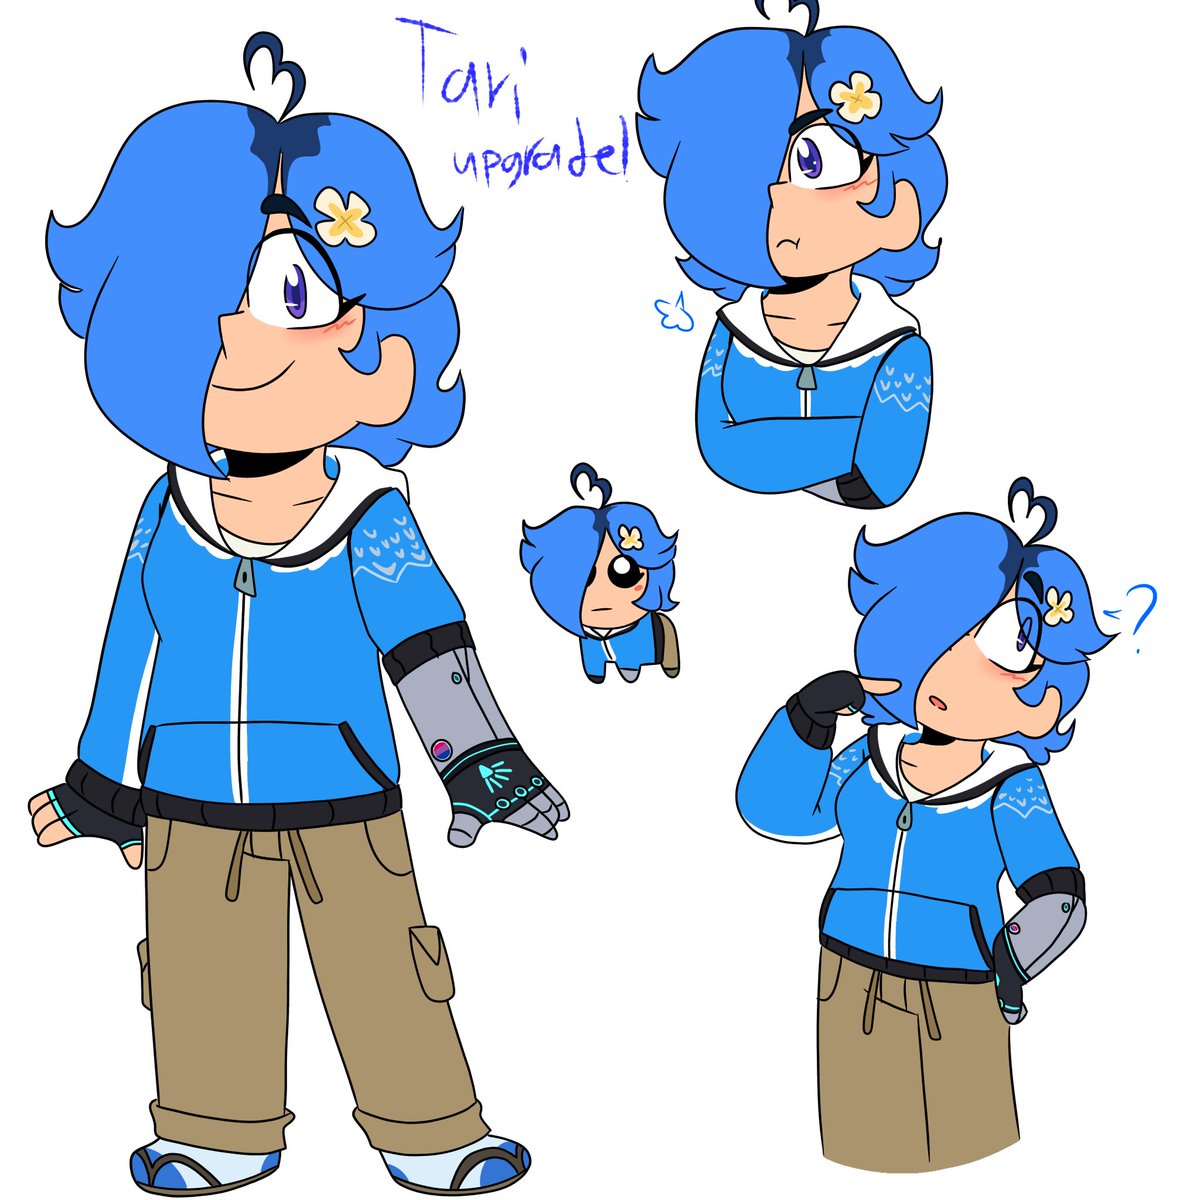 Bby girl got upgraded and I’m so happy for her💙💙
So I might as well upgrade my design for her too!
[#SMG4 #Smg4tari #smg4fanart]